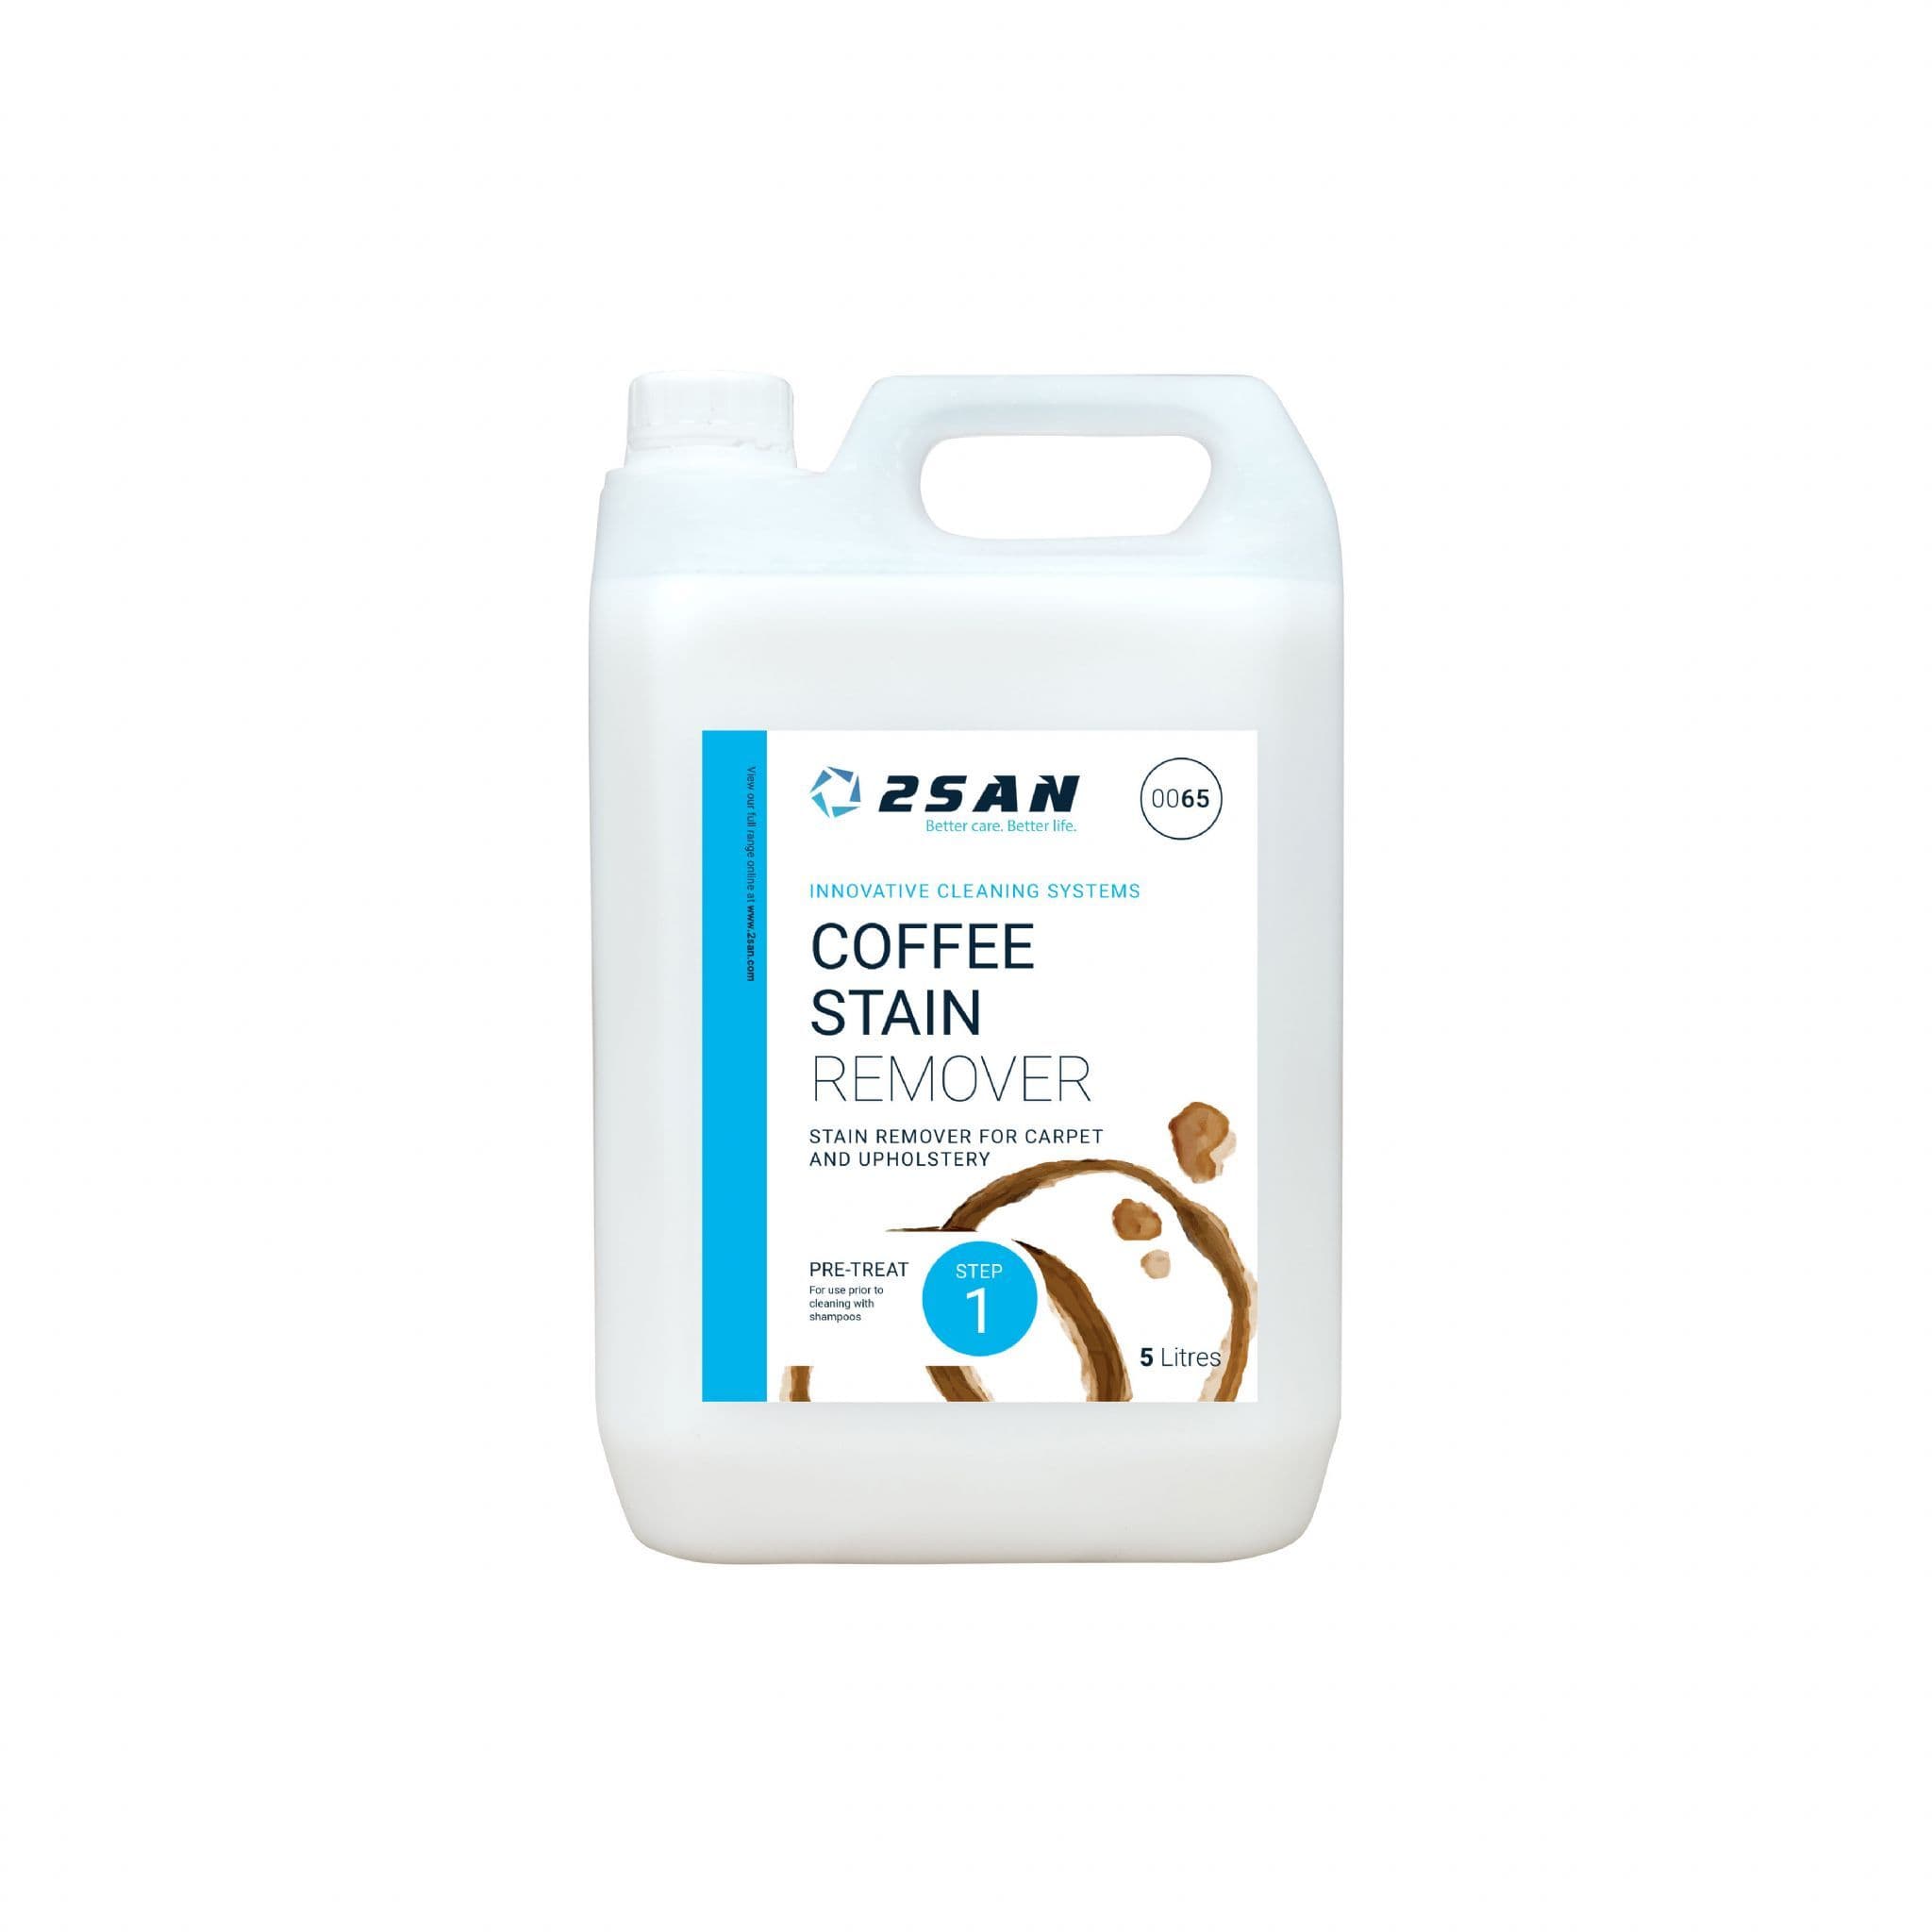 2SAN(Craftex) Coffee Stain Remover 5L 0065 SPECIAL OFFER FOR LIMITED TIME £18.95 INC VAT